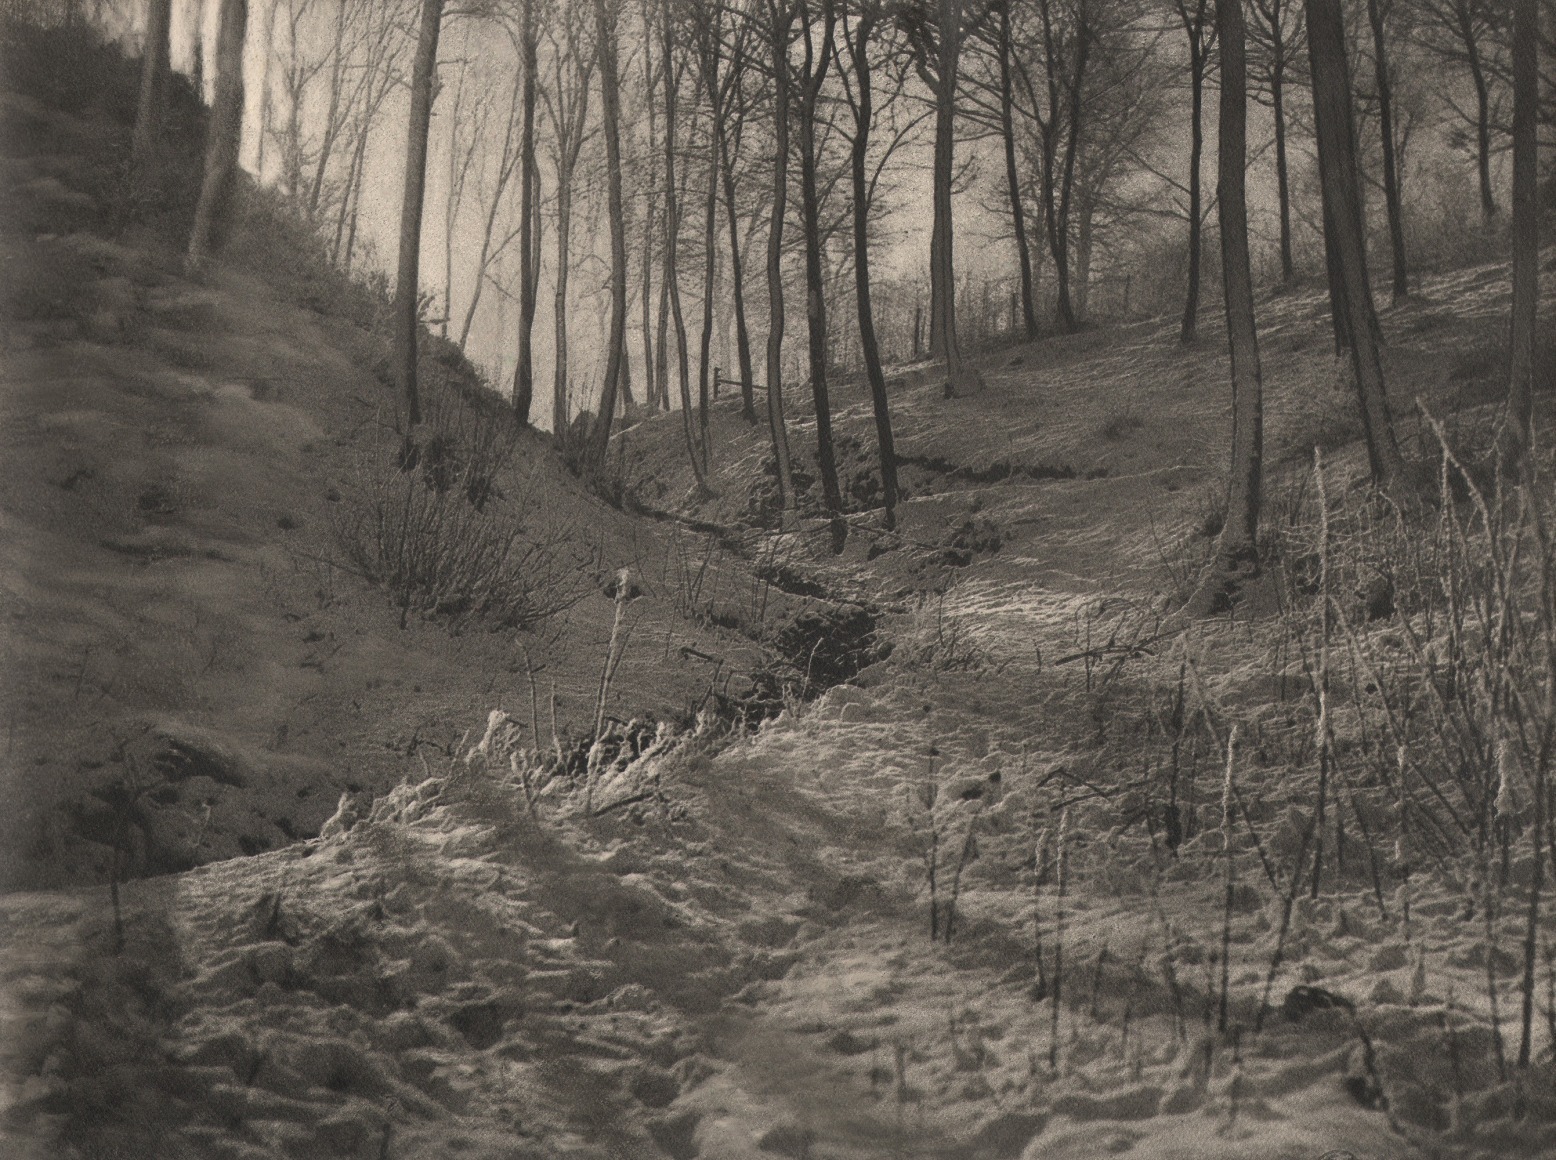 25. L&eacute;onard Misonne, [title illegible], 1933. Sun-streaked snowy, wooded hills with thin trees. Sepia-toned print.